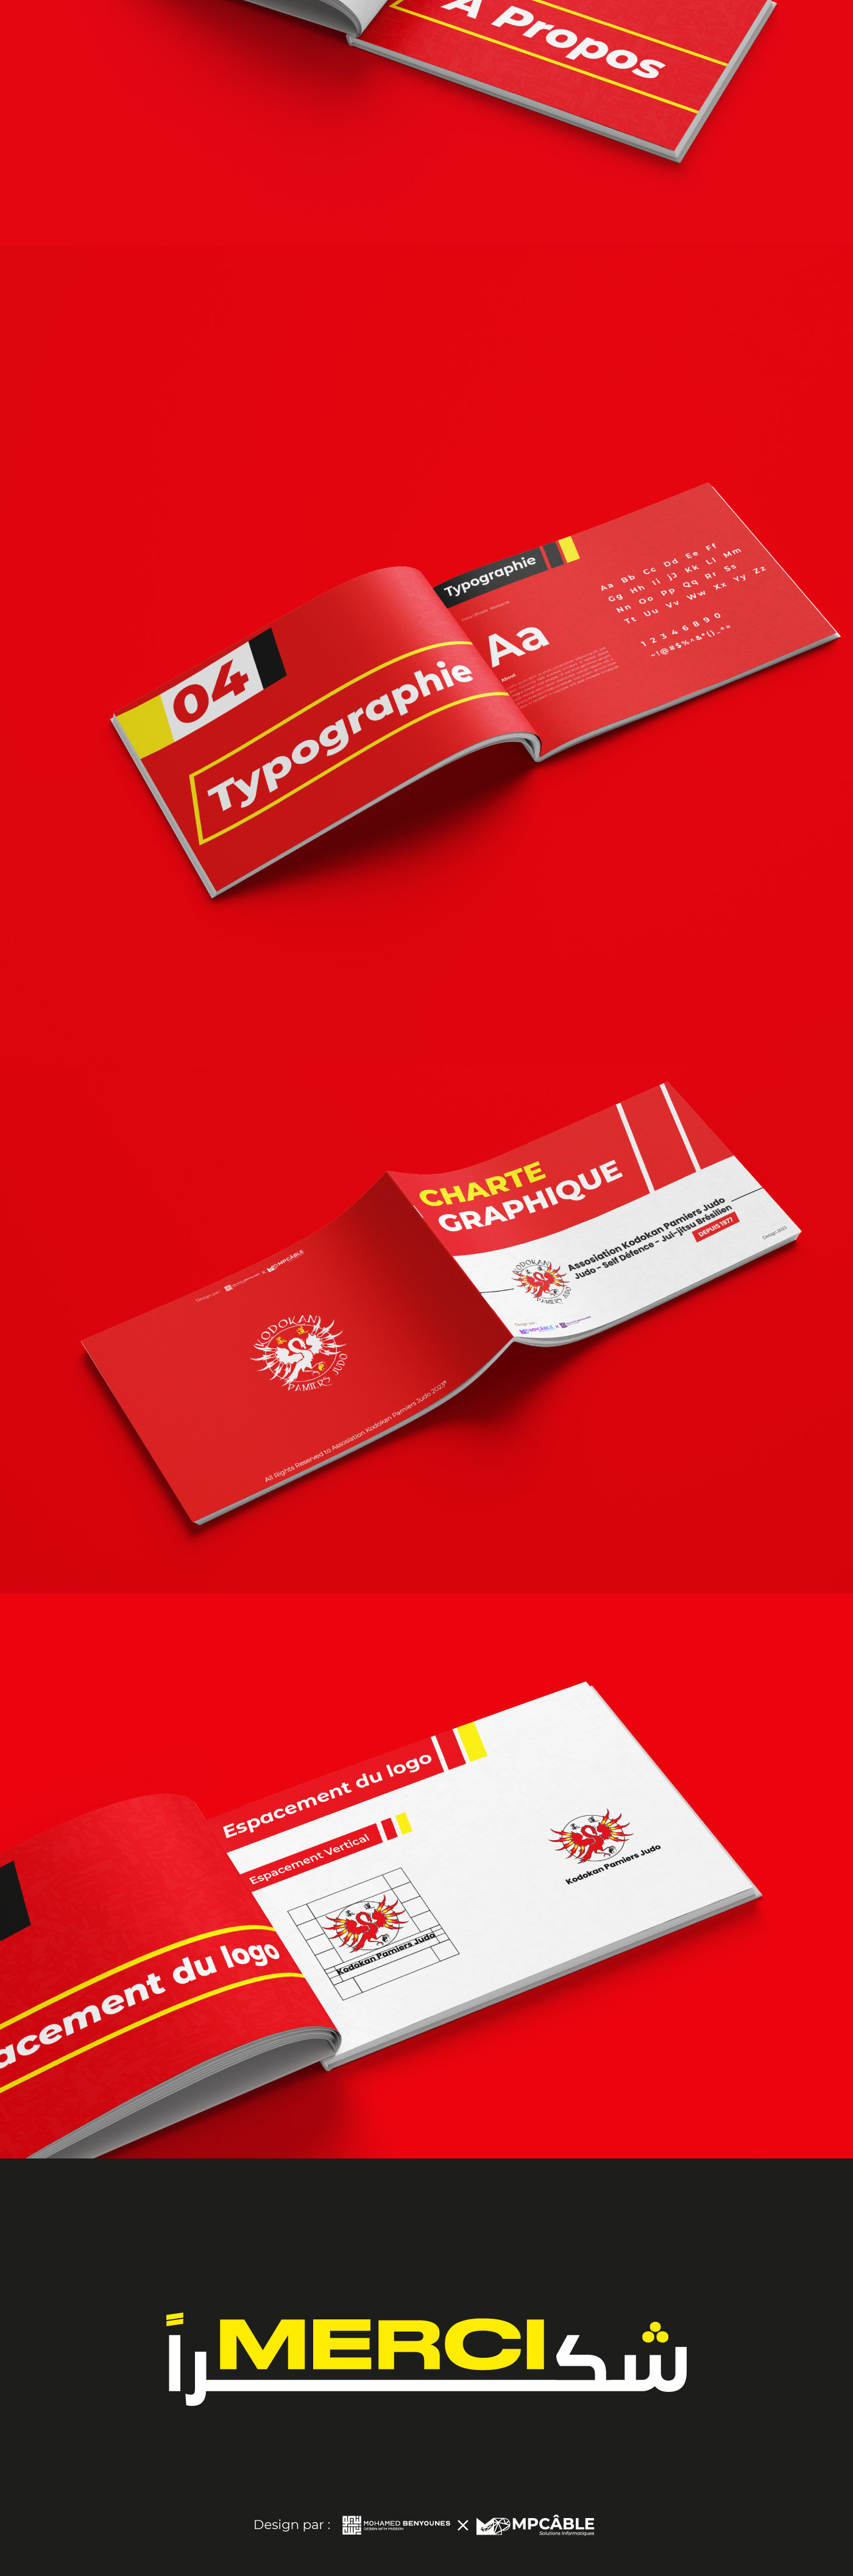 guidelines brand book visual identity brand guidelines guides